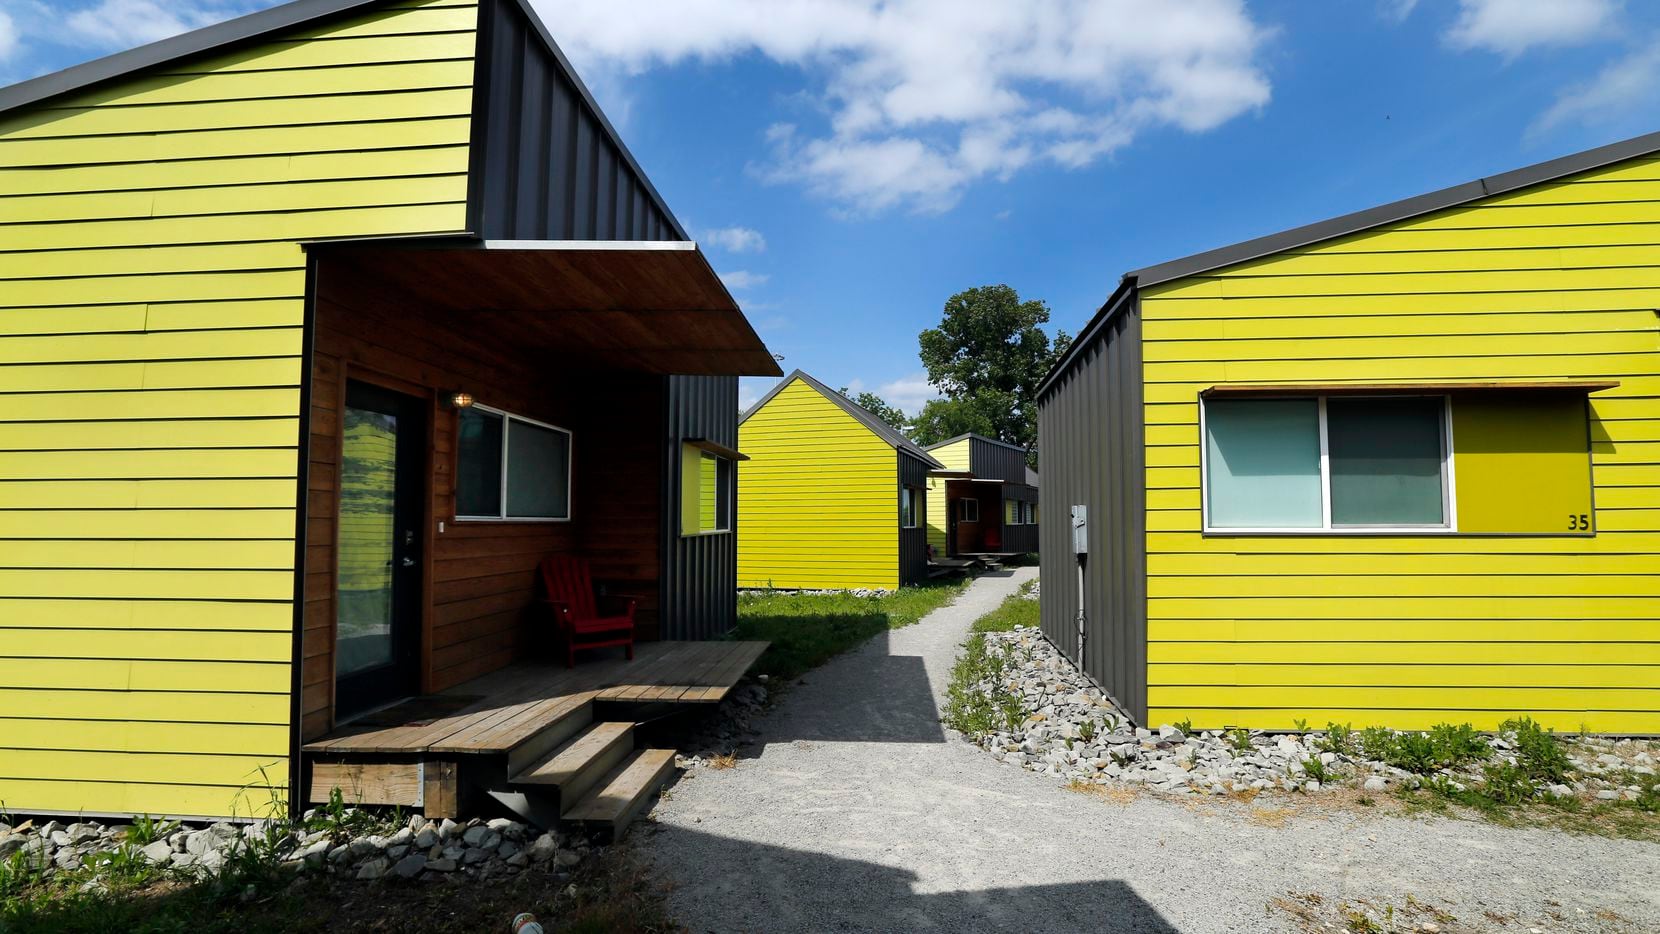 The Cottages at Hickory Crossing have brightly colored units with pathways between them. The units are designed by BC Workshop.